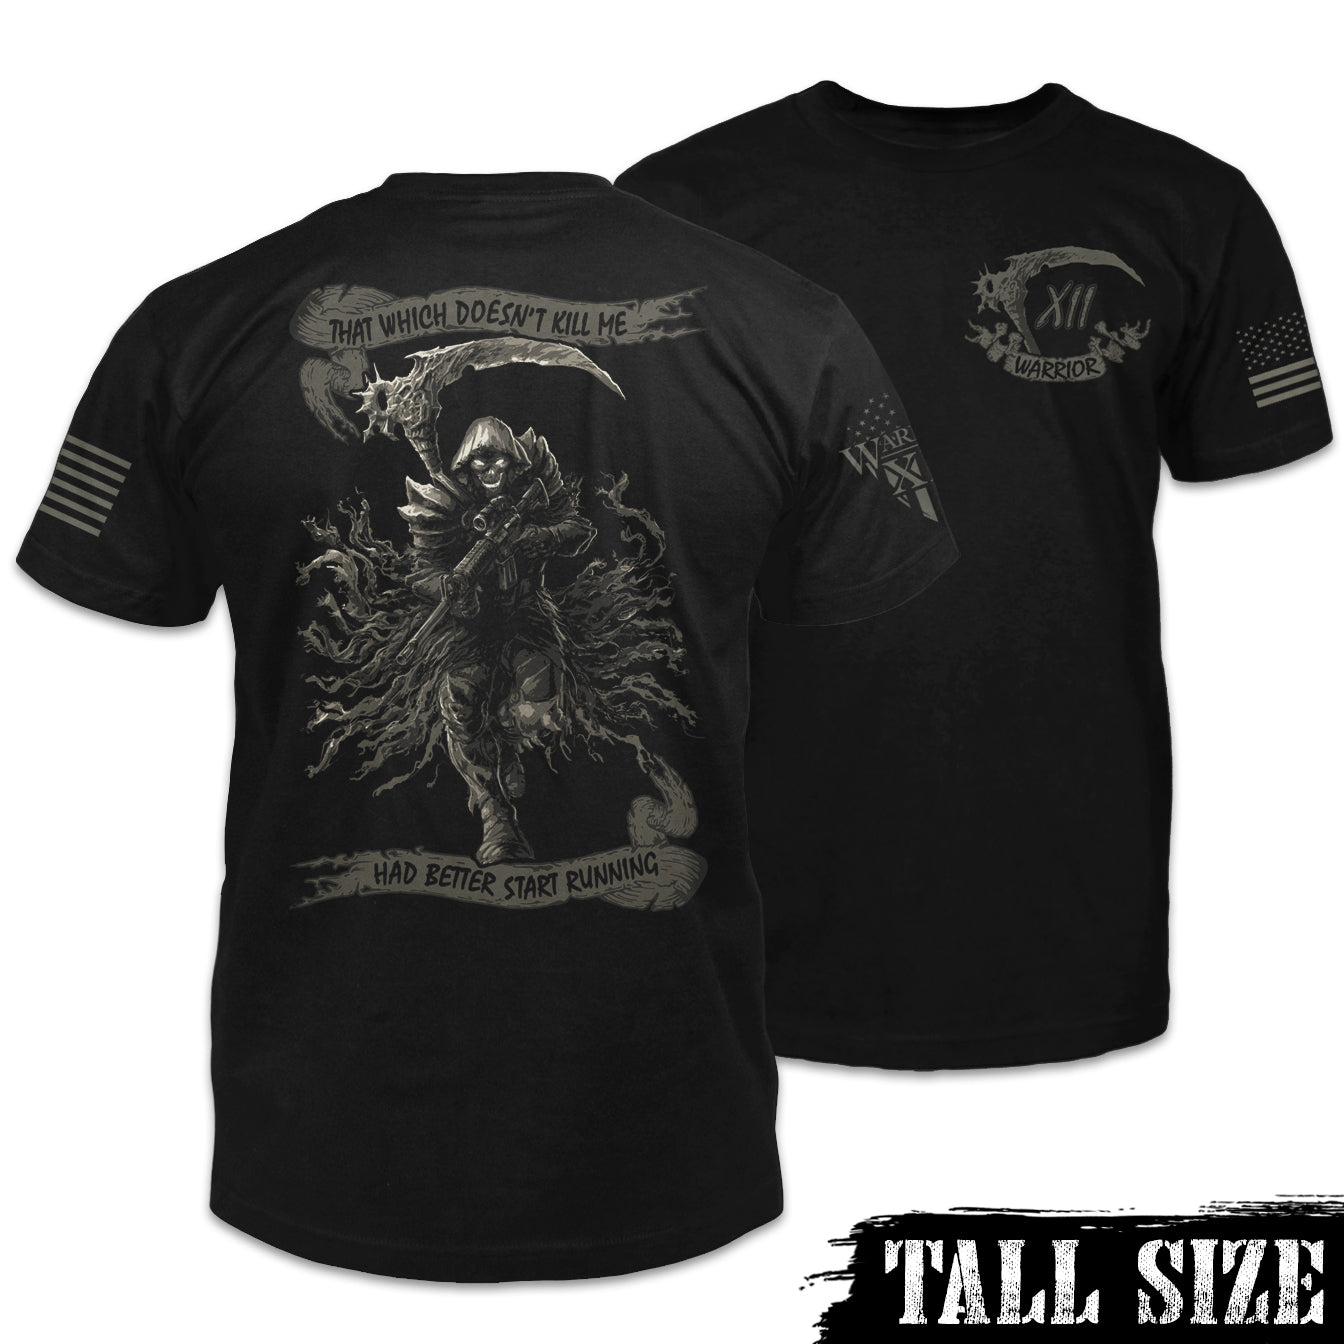 Front & back black tall size shirt with the words "That Which Doesn't Kill Me Had Better Start Running" with a Reaper holding an AR-15 printed on the shirt.